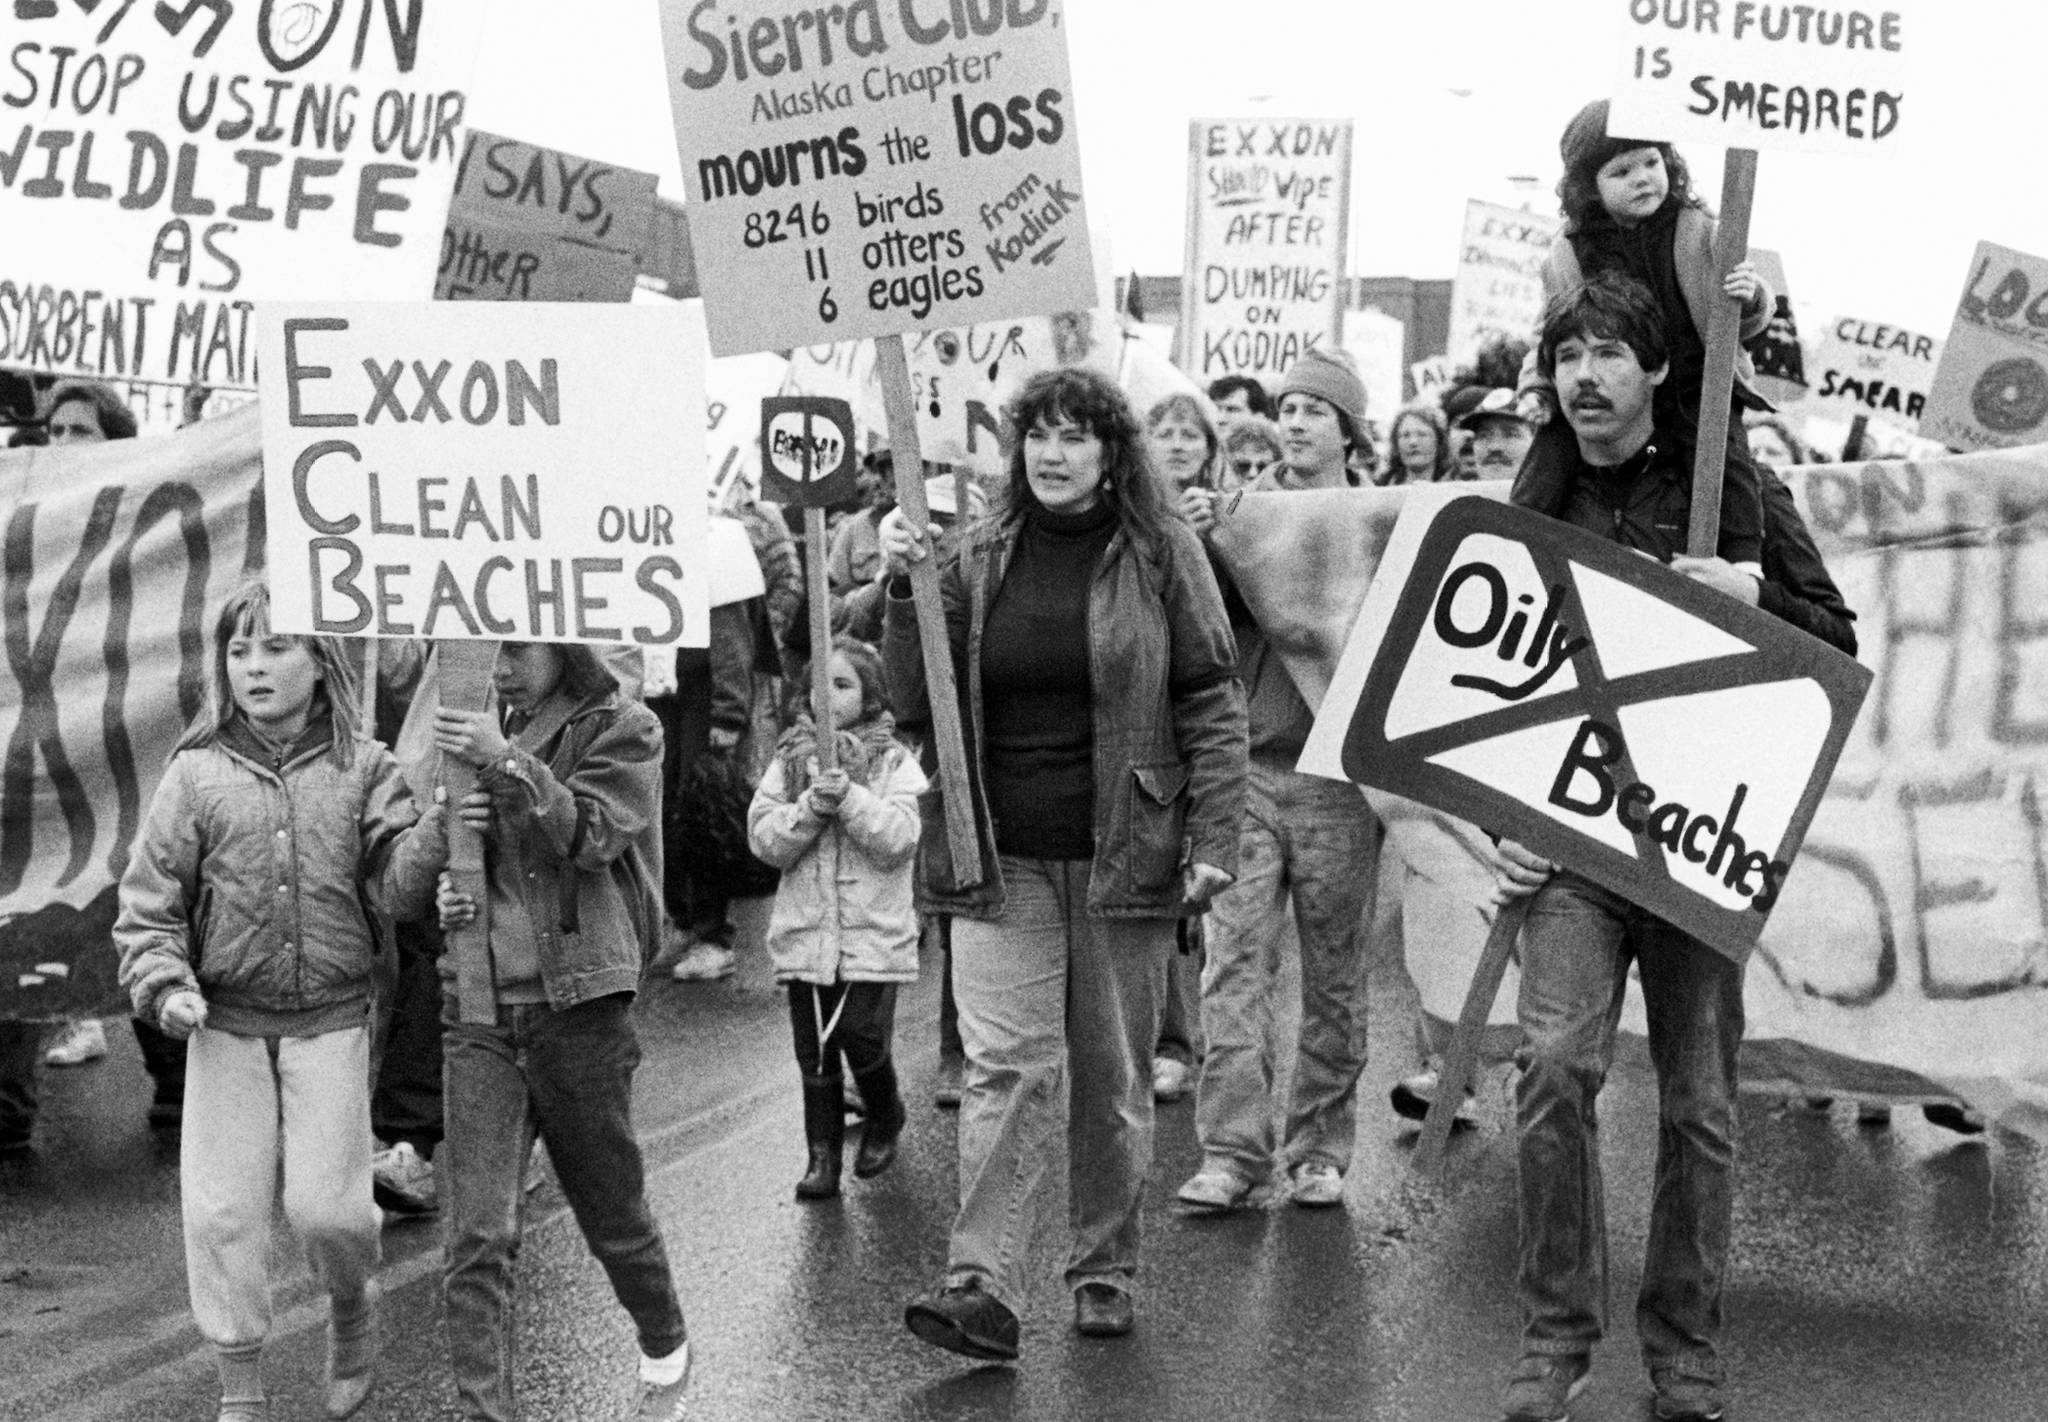 In this May 27, 1989 photo, people carry signs to protest the Exxon oil spill in Anchorage, Alaska. It’s been 30 years since the disaster, at the time the largest oil spill in U.S. history. (Marion Stirrup | Associated Press File)